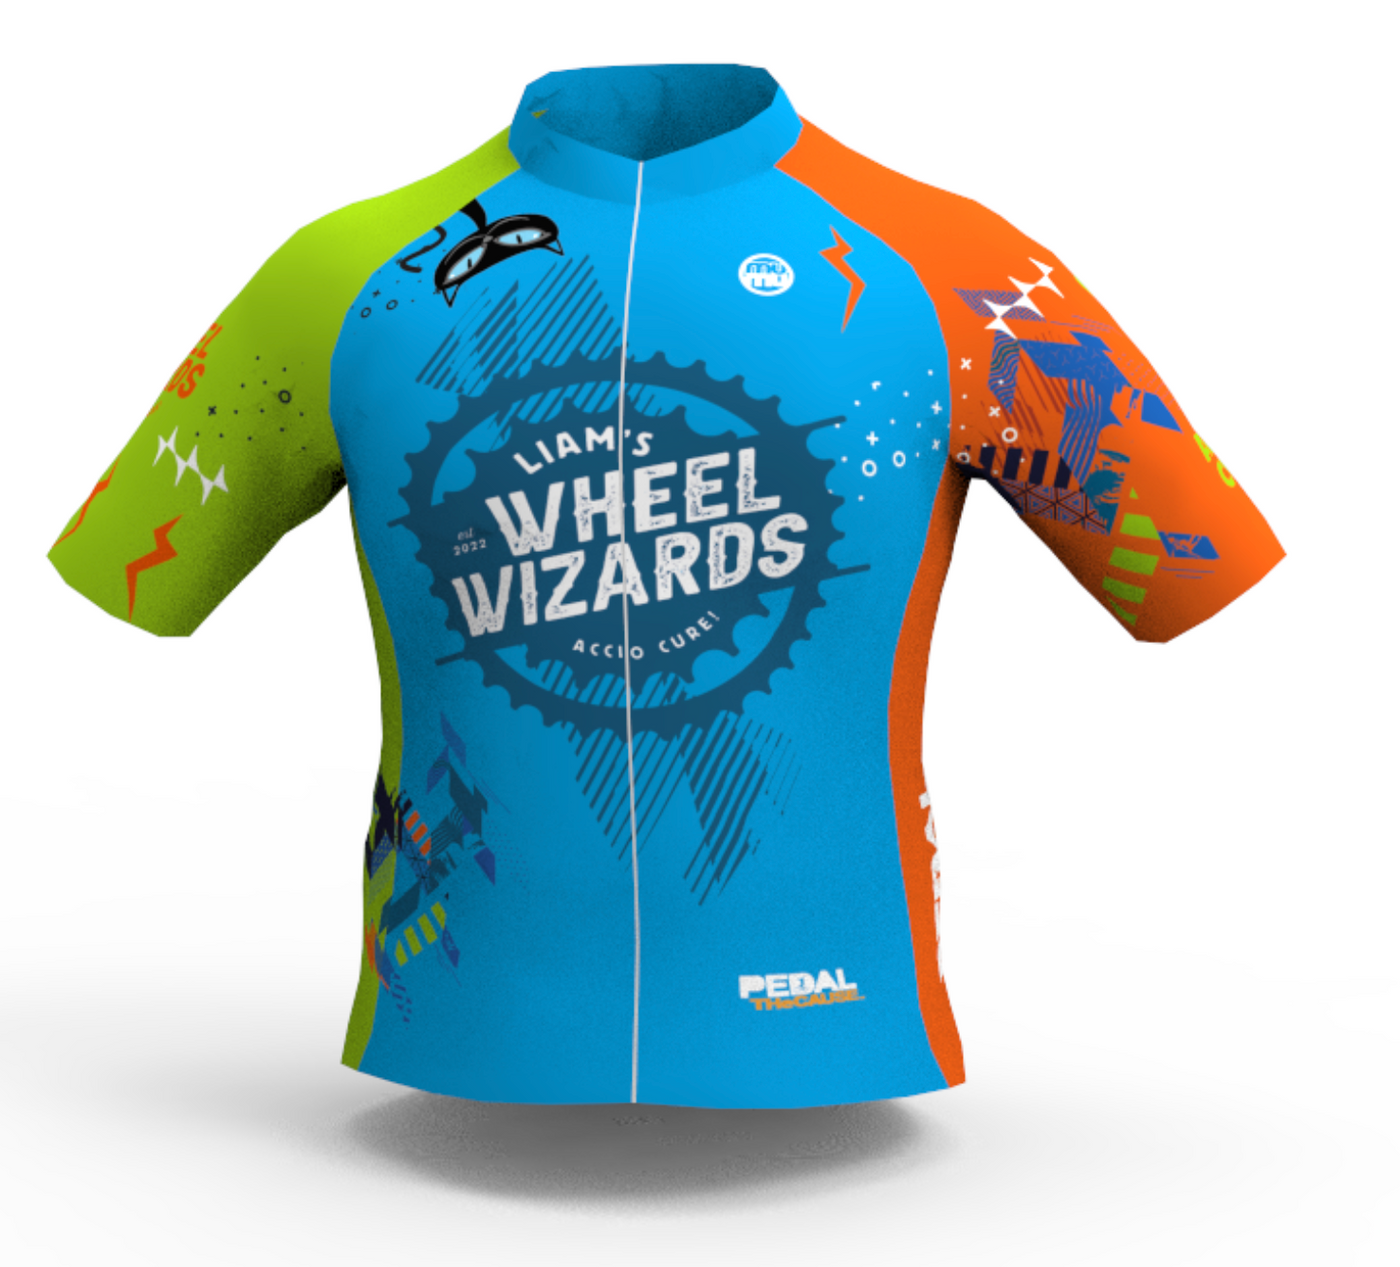 Liam's Wheel Wizards Youth Jersey